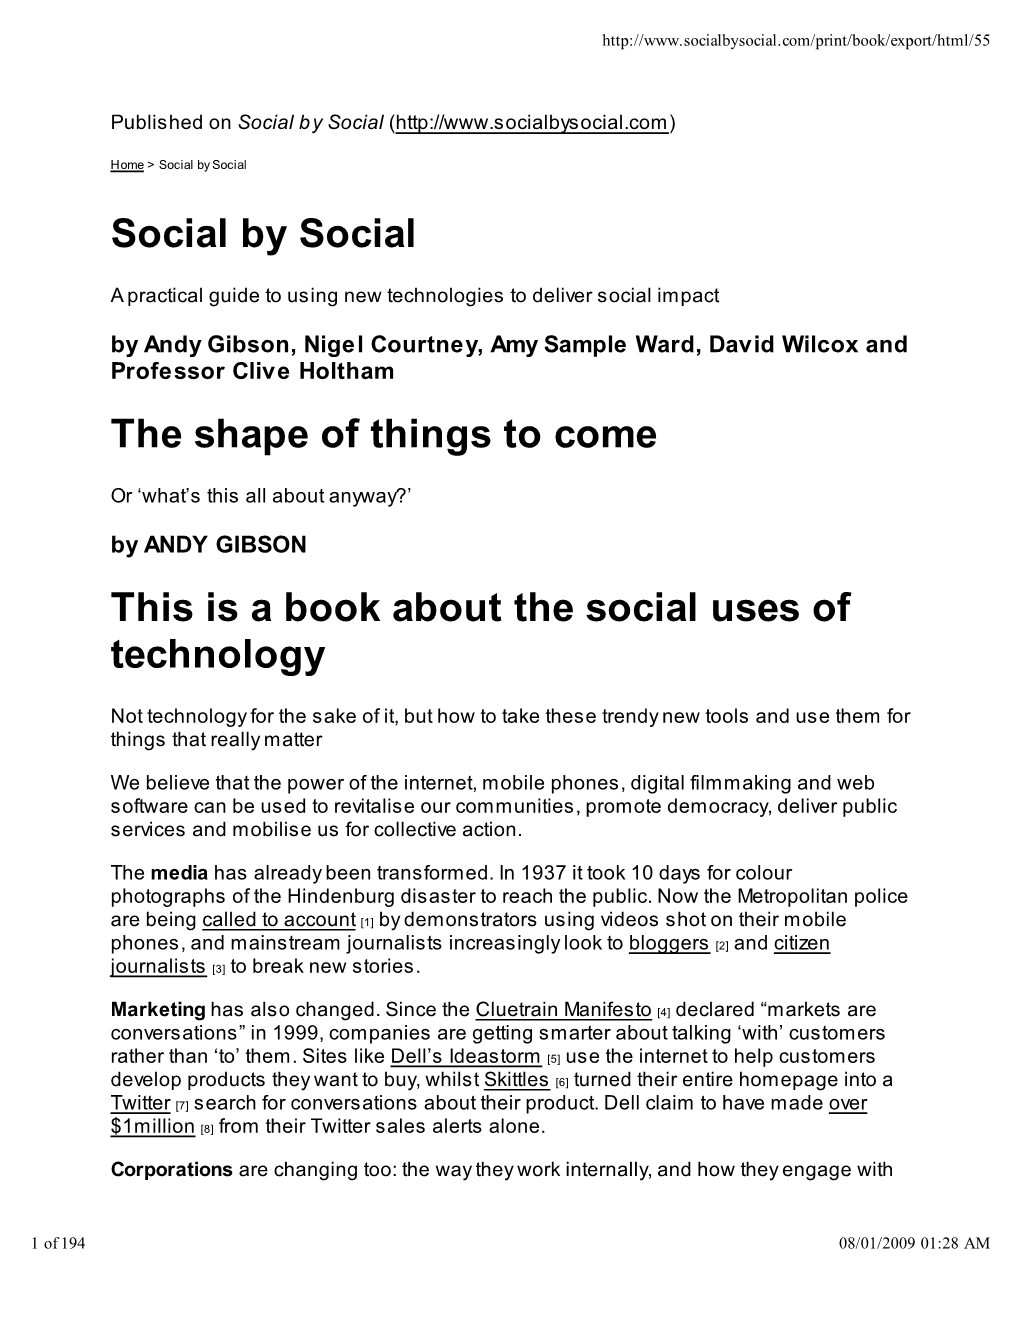 Social by Social the Shape of Things to Come This Is a Book About The